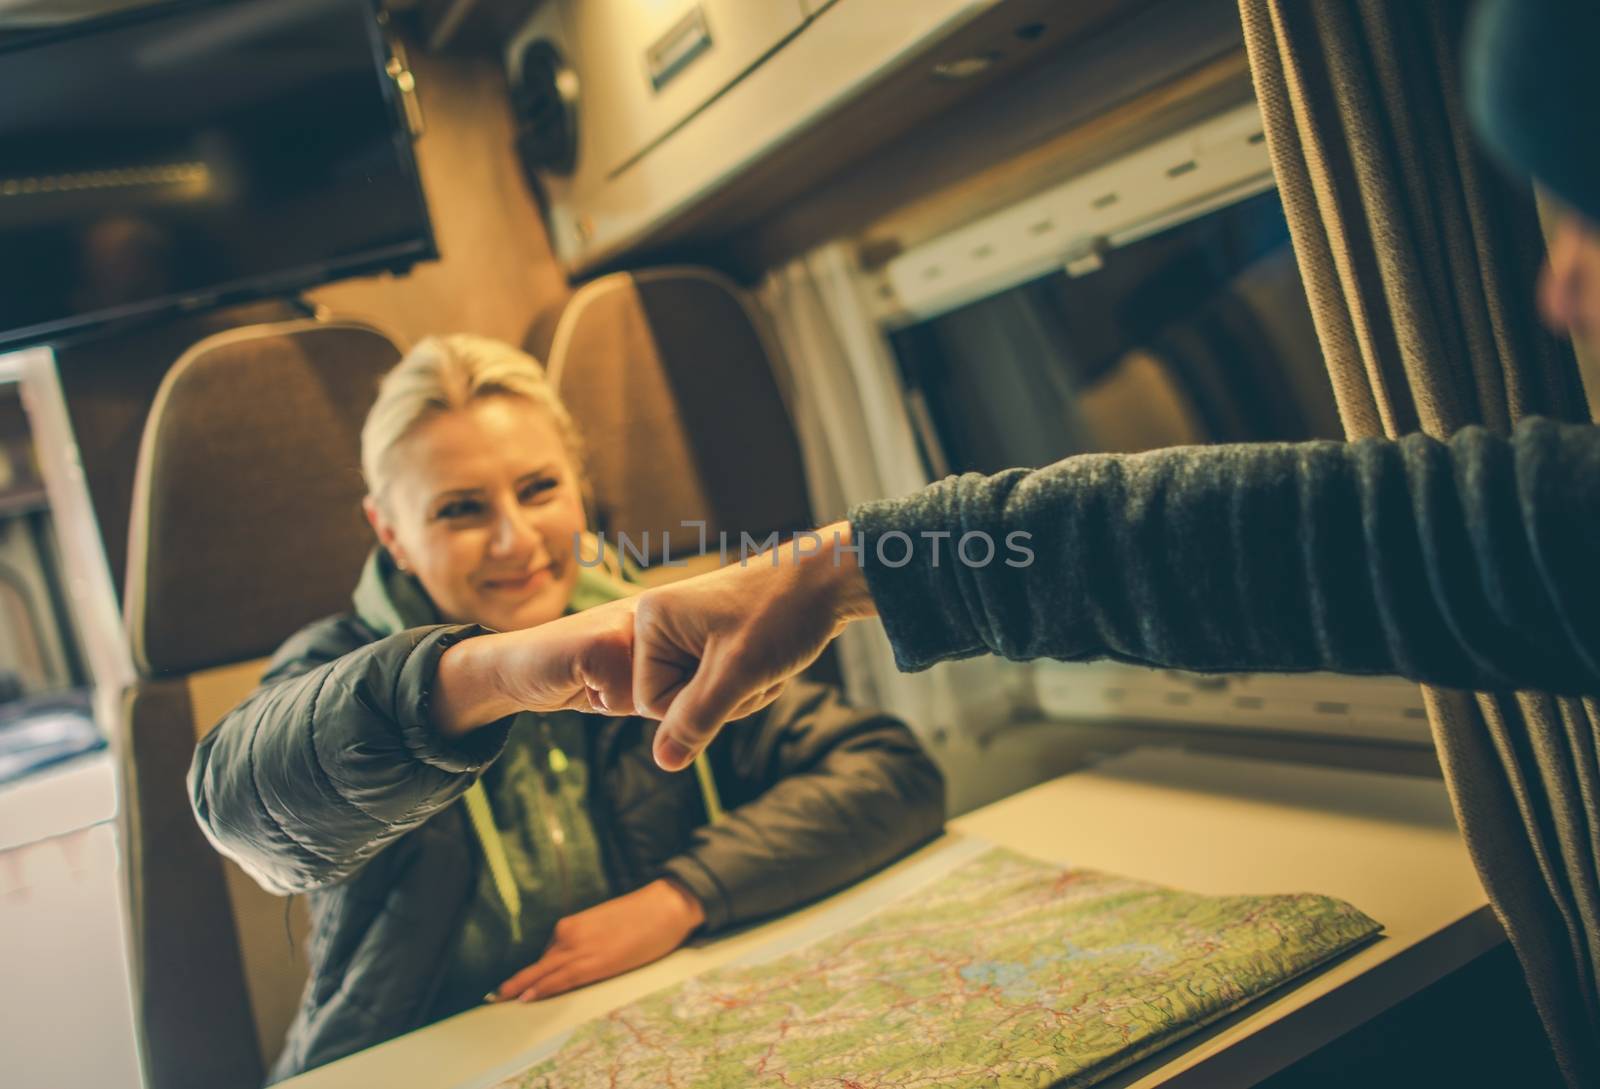 Approved RV Trip Fist Bump. Happy Couples in the Camper Motorhome Planning New Road For the Next Day Trip.